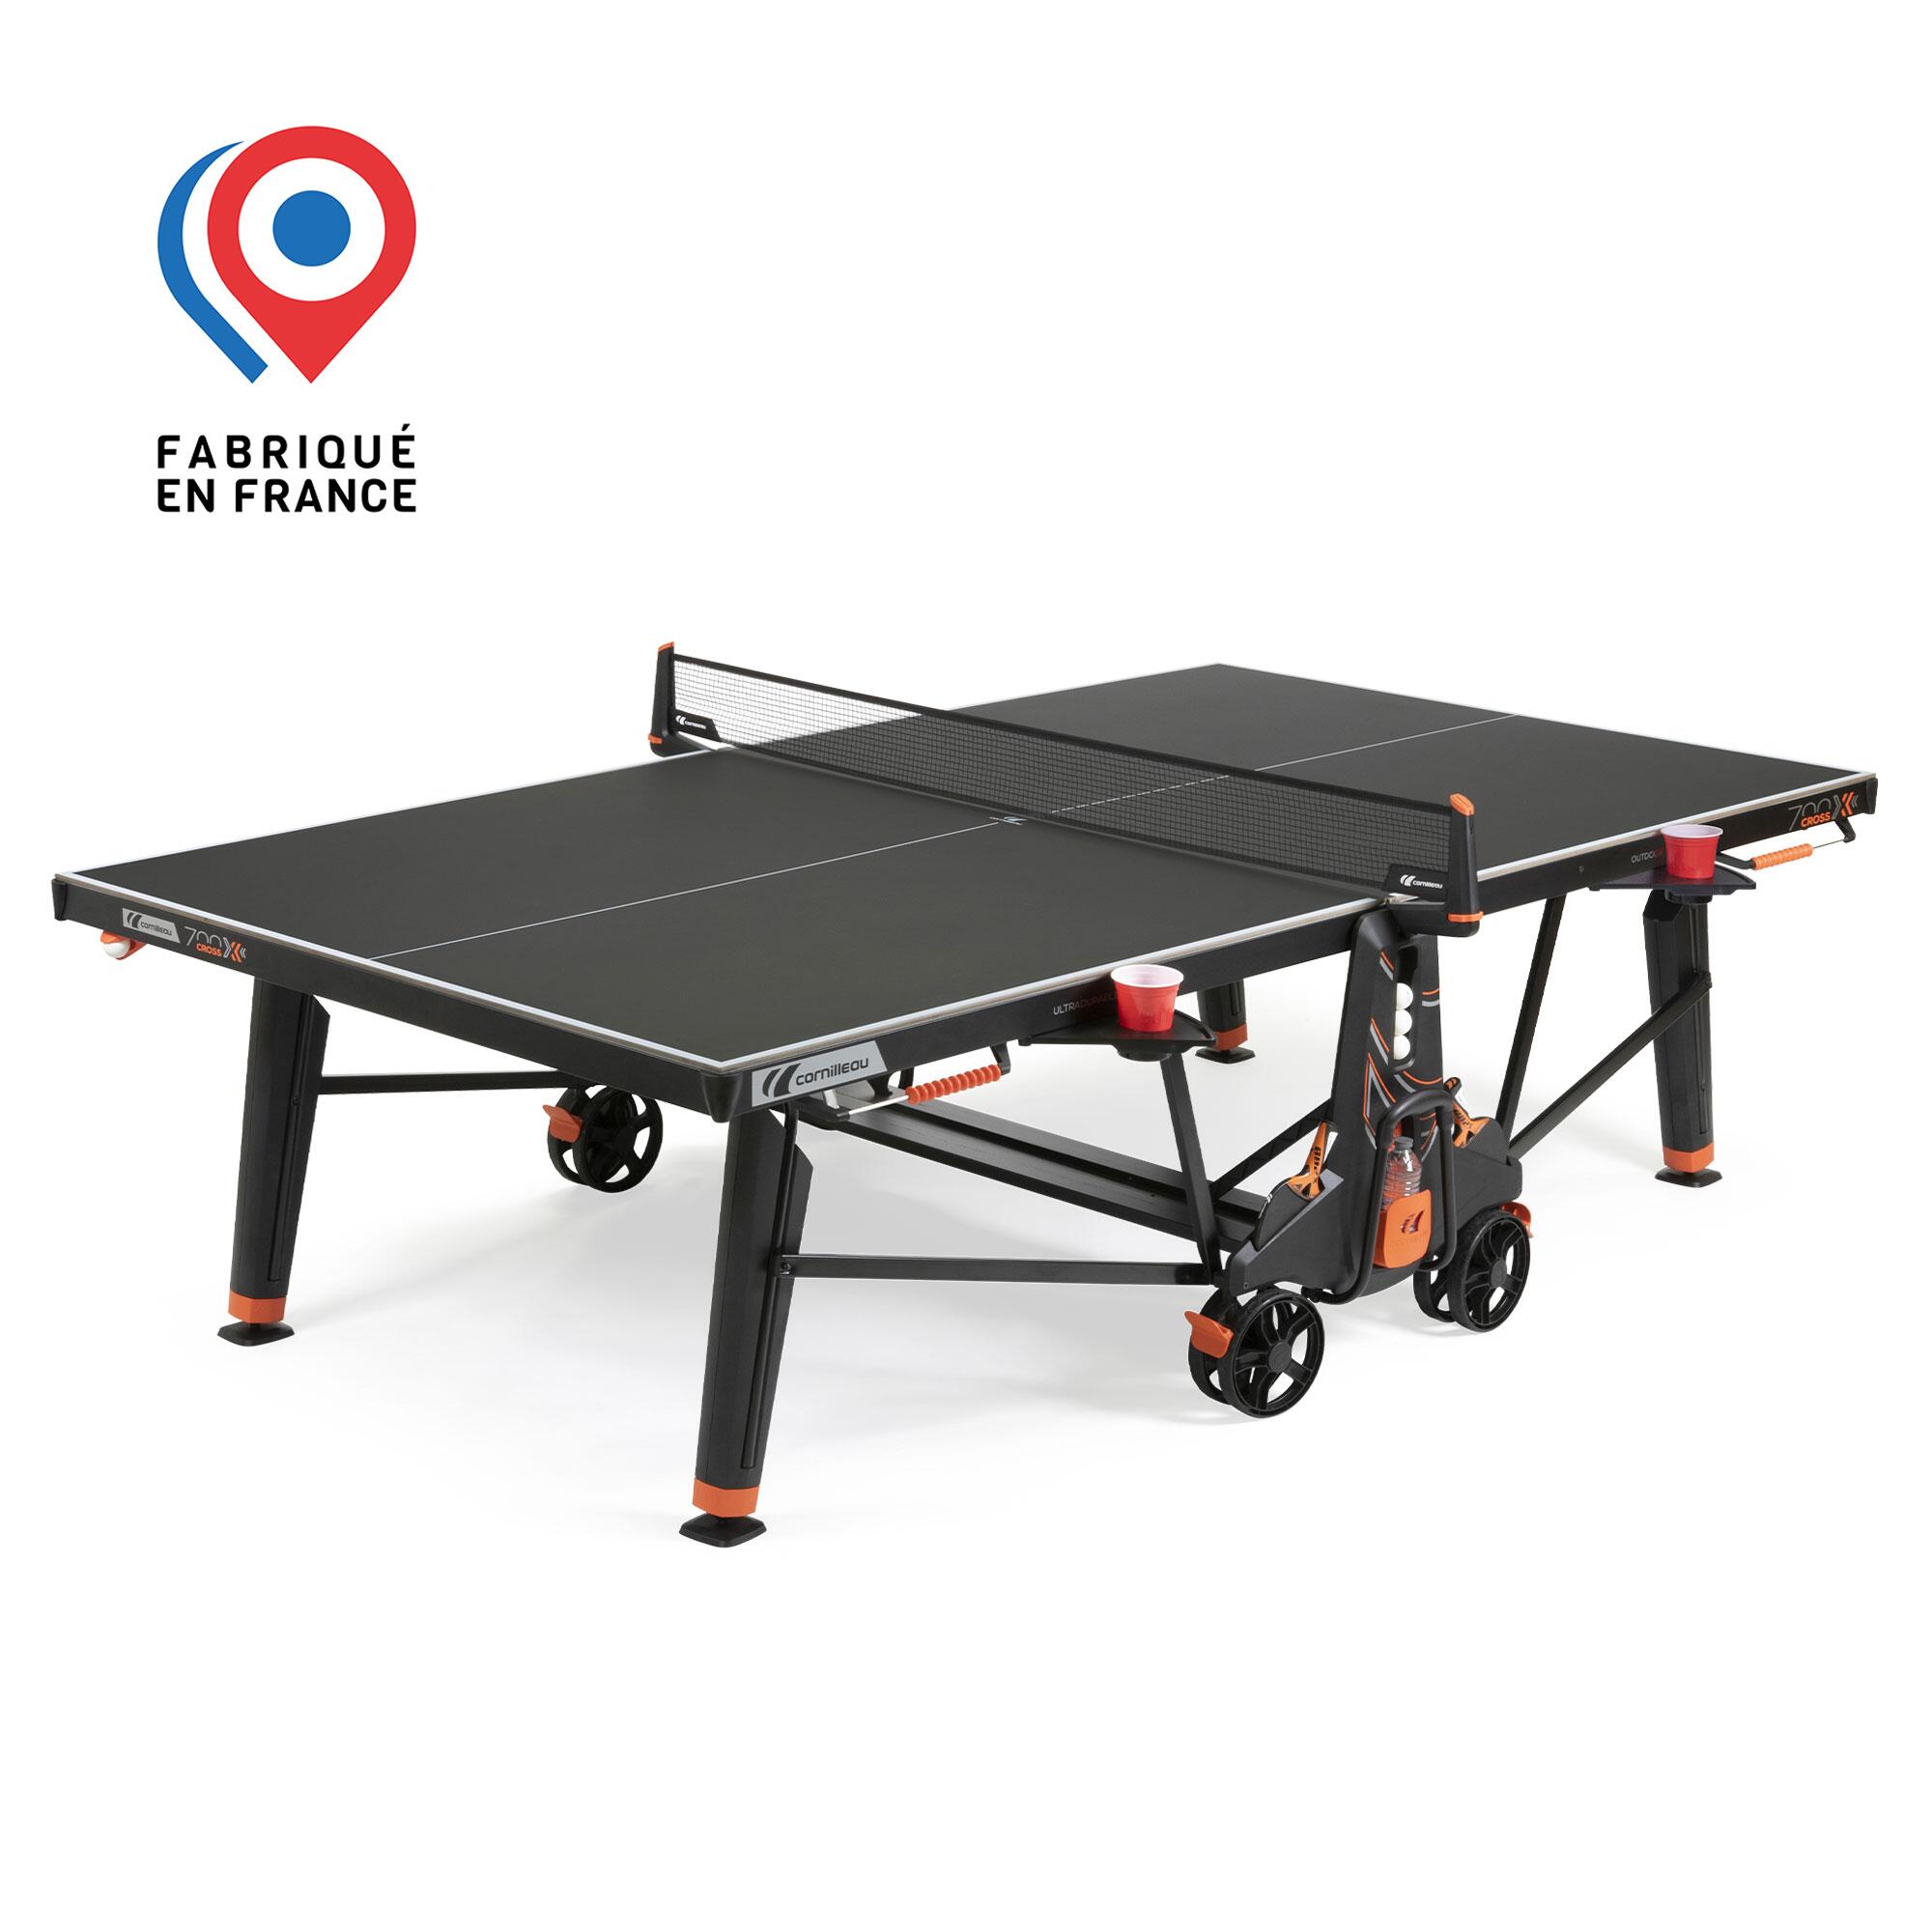 700X Performance Outdoor Table Tennis Table 1/8